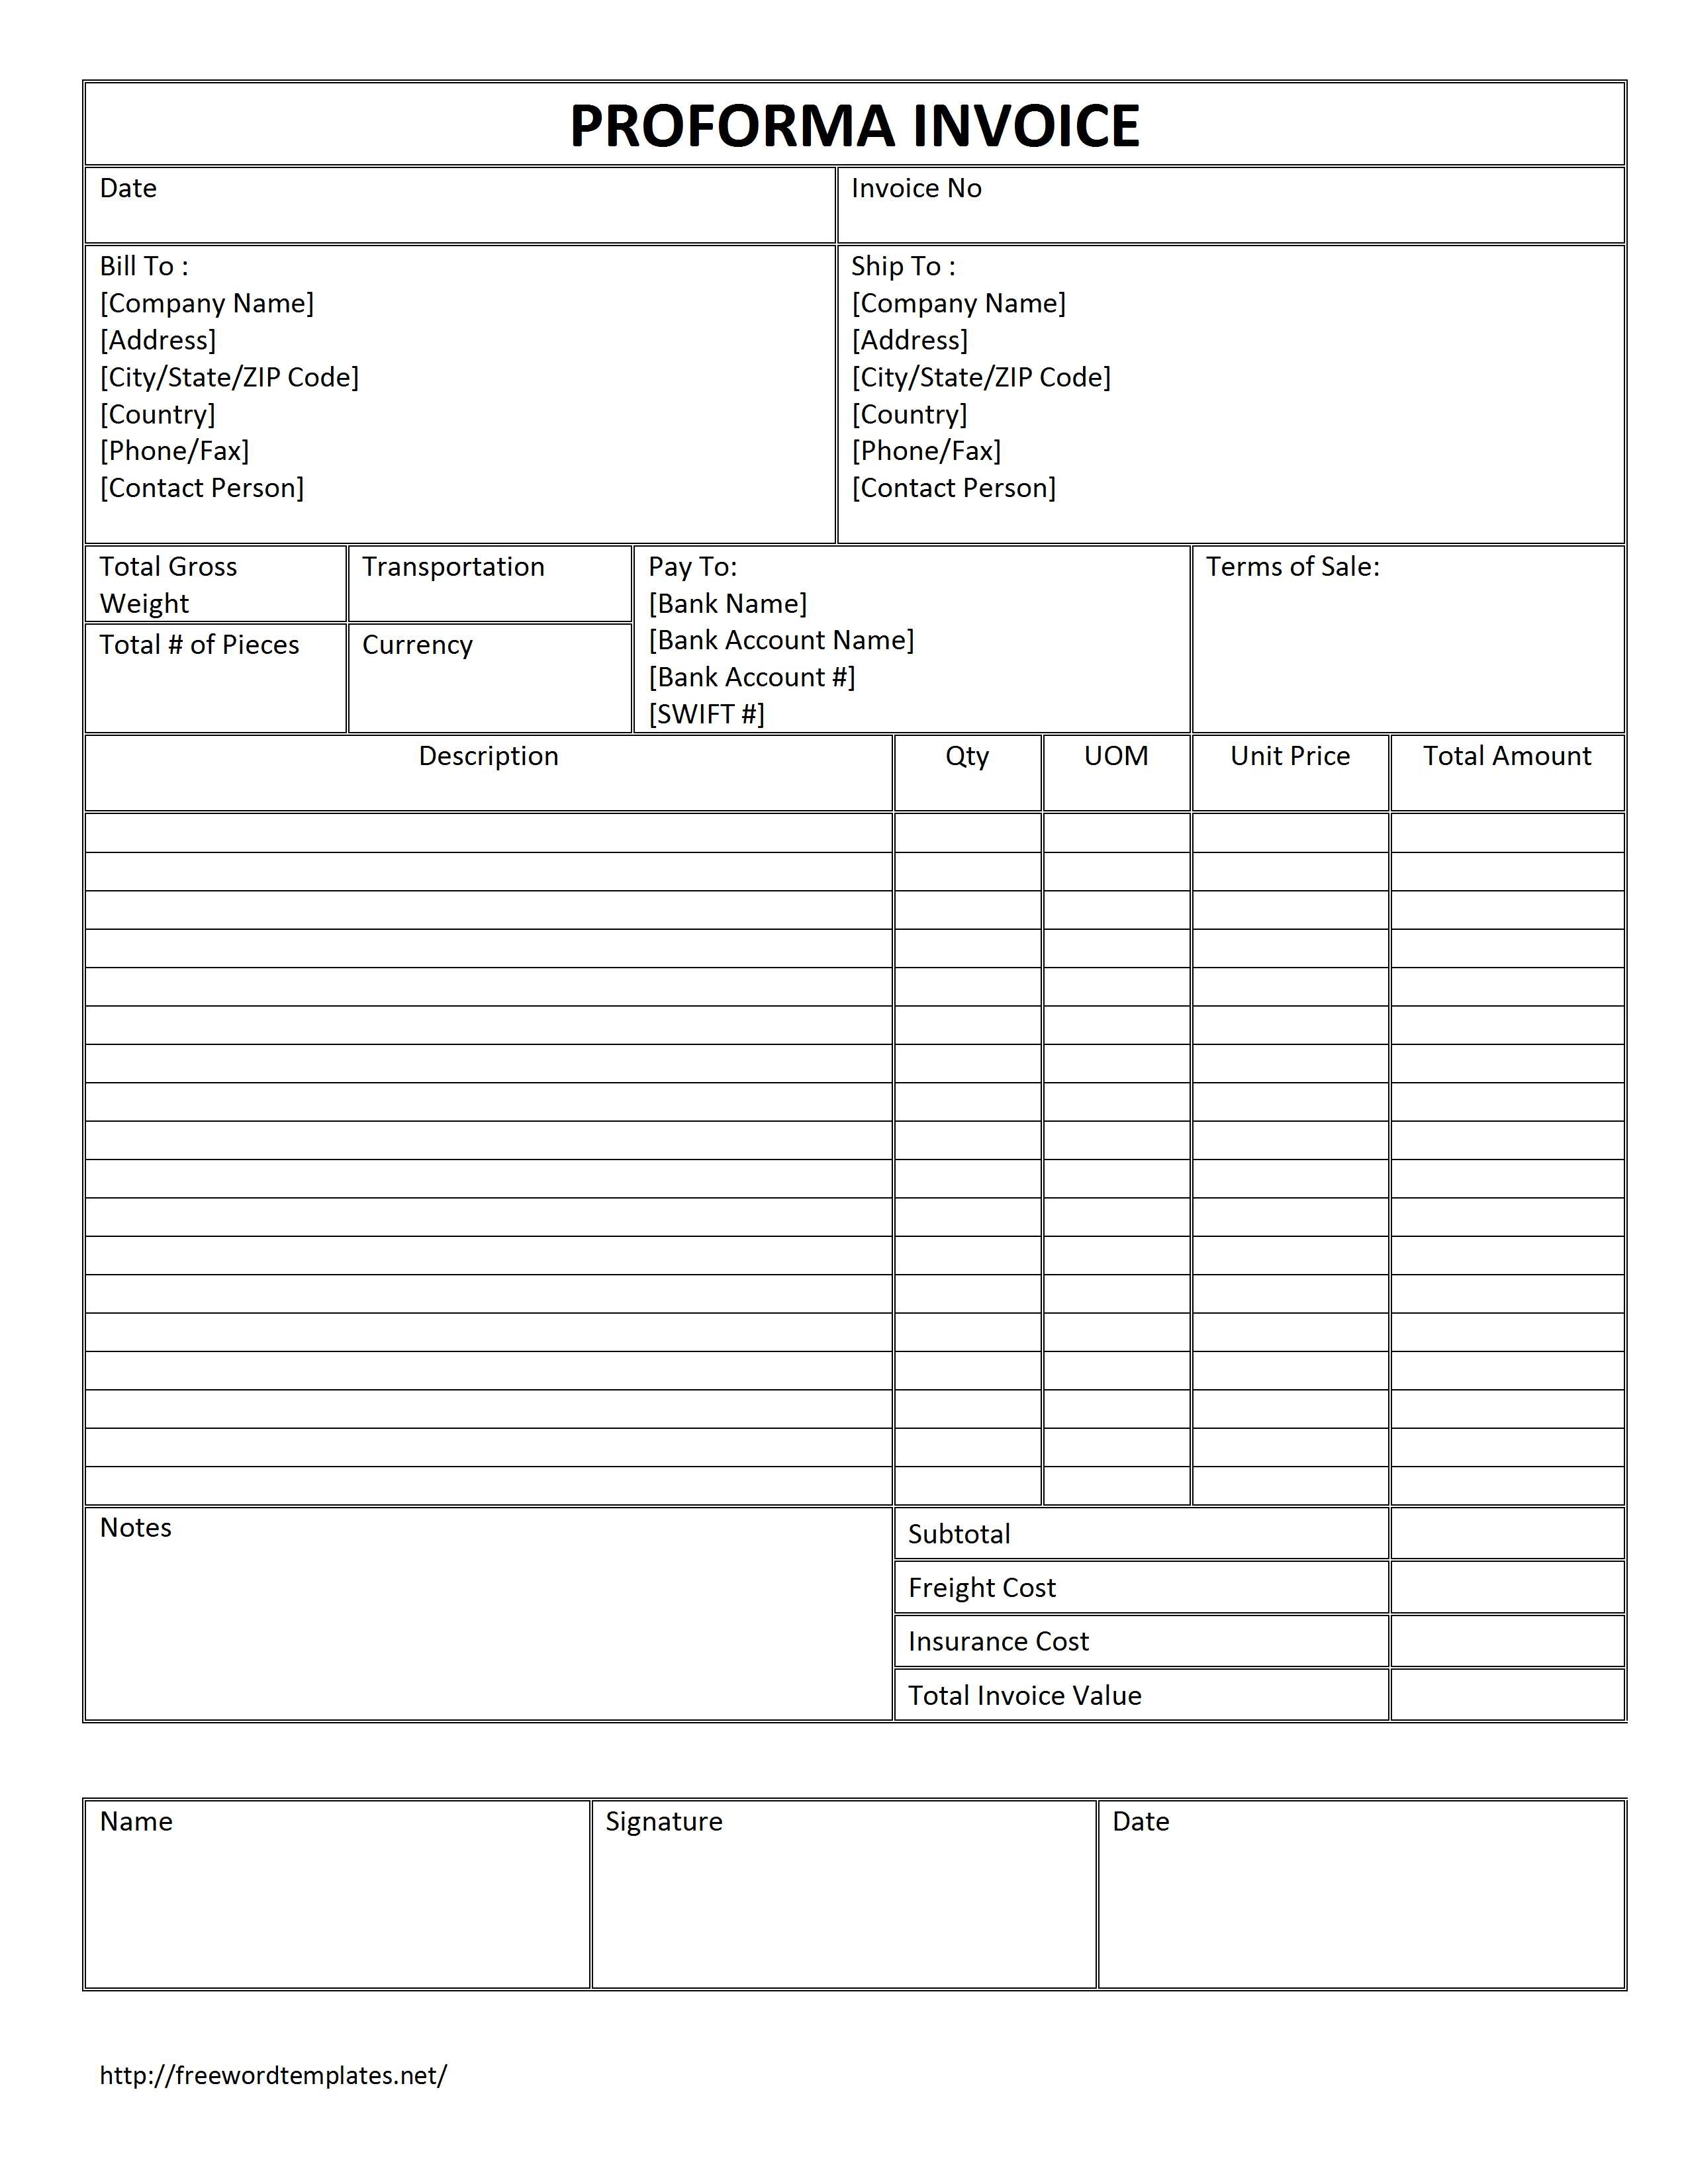 meaning-proforma-invoice-invoice-template-ideas